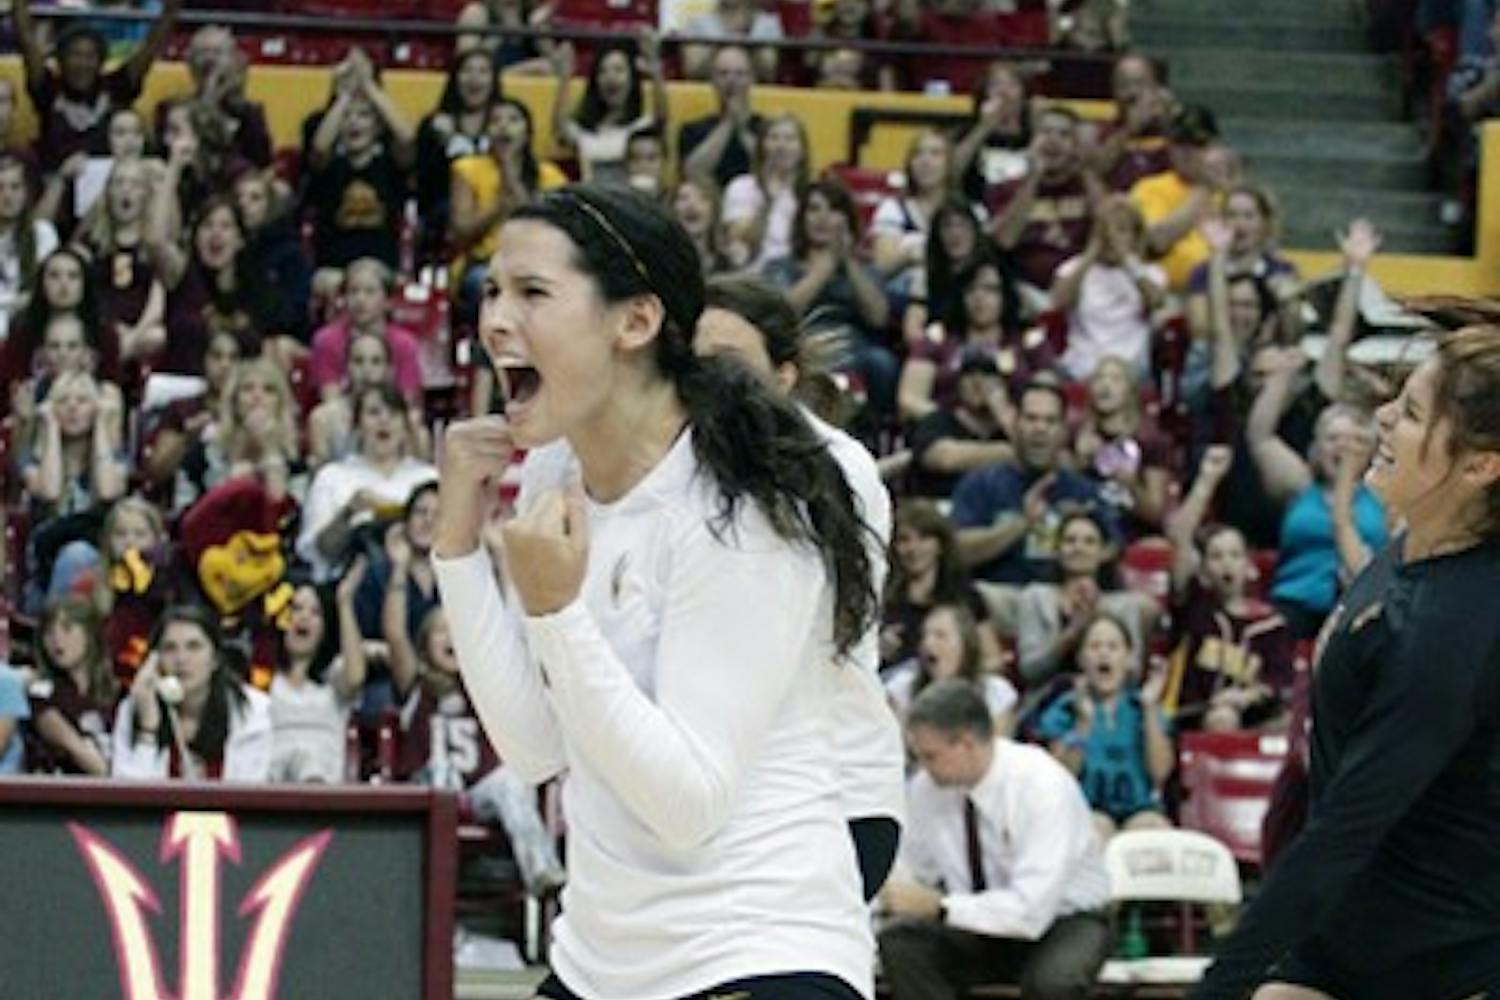 LOVE FOR THE GAME: ASU sophomore outside hitter Danica Mendivil celebrates after a point during a match. The 2010 Pac-10 All-Freshman Honorable Mention inductee said she enjoys the intensity and competition as a member of the Sun Devil volleyball team. (Photo by Beth Easterbrook)